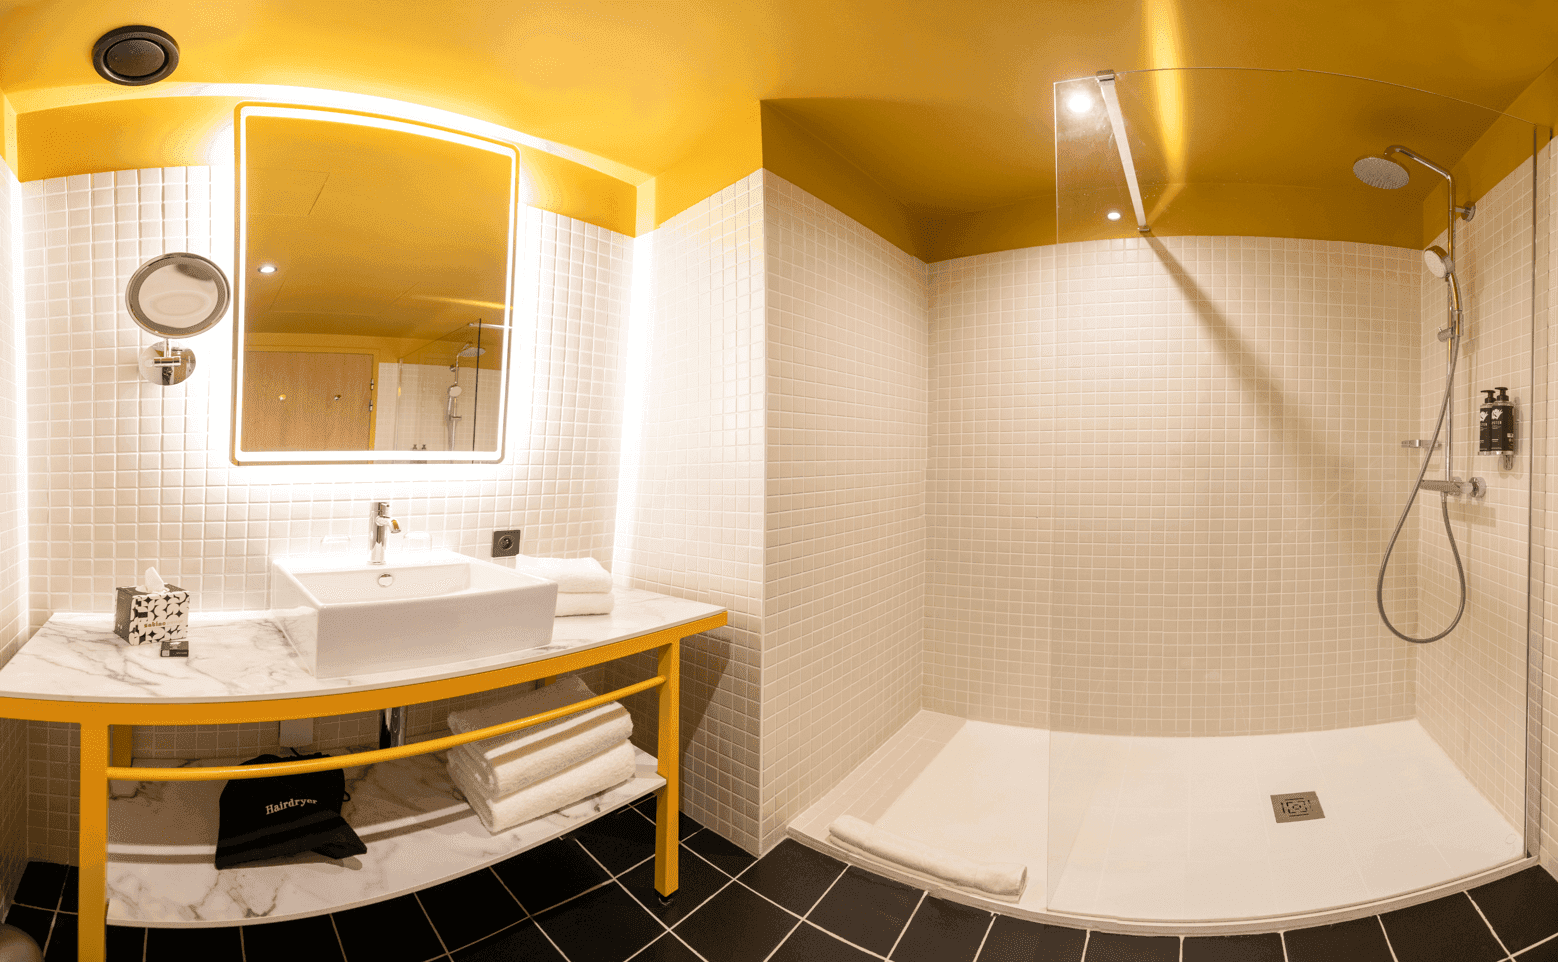 Bathroom vanity & shower area in Apartment at Kopster Hotel Paris Ouest Colombes